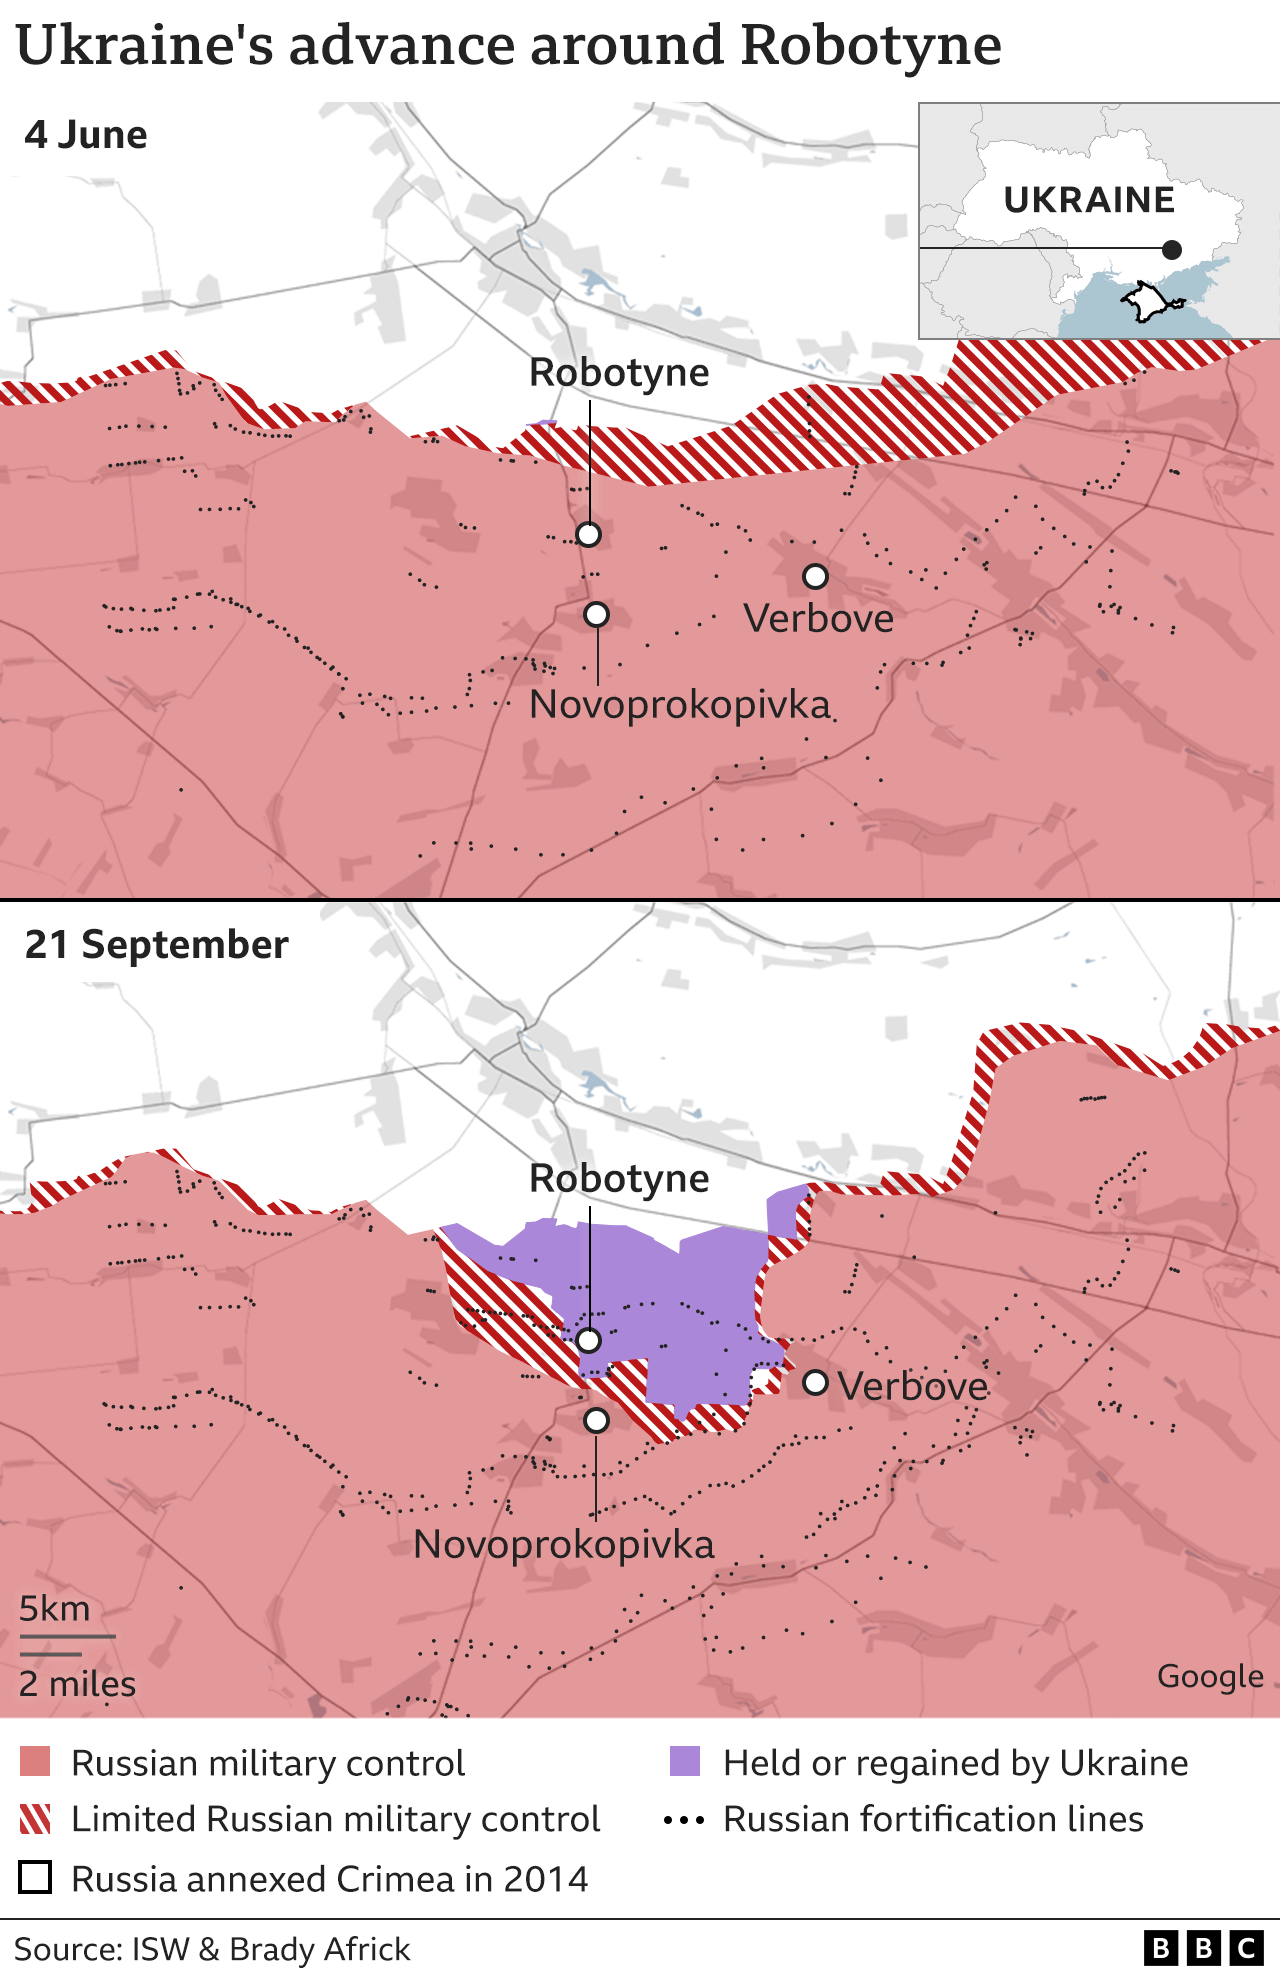 Before and after map showing Russian and Ukrainian positions on 4 June and 21 September which shows how Ukraine has advanced around Robotyne